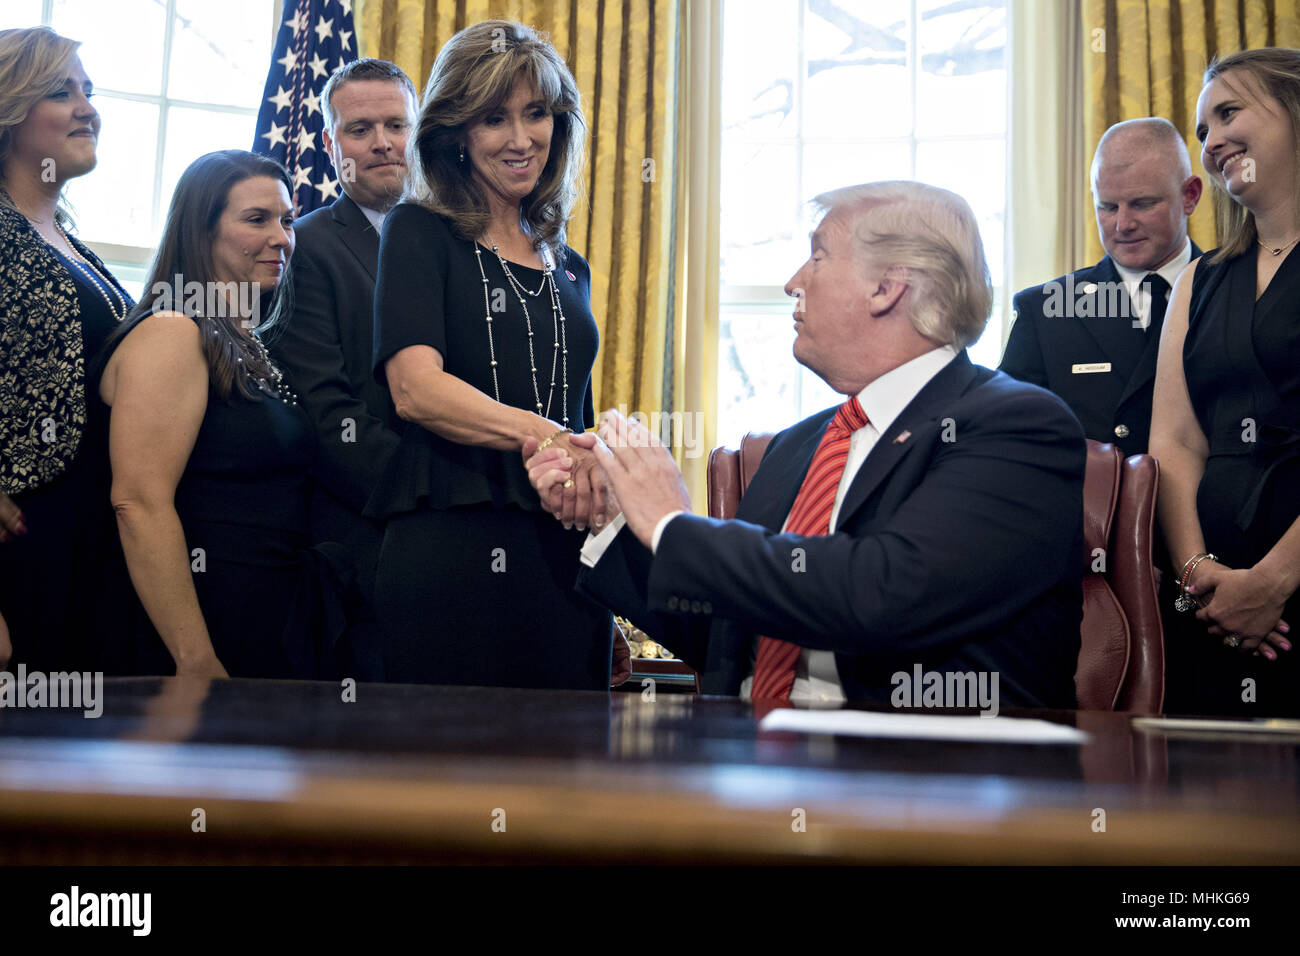 United States President Donald Trump, right, shakes hands with Tammie Jo Shults, a Southwest Airlines Co. captain, while meeting with the crew and passengers of Southwest Airlines flight 1380 in the Oval Office of the White House in Washington, DC, U.S., on Tuesday, May 1, 2018. An engine on Southwest's flight 1380, a Boeing Co. 737-700 bound for Dallas from New York's LaGuardia airport, exploded and made an emergency landing on April 17 sending shrapnel into the plane and killing a passenger seated near a window. Credit: Andrew Harrer/Pool via CNP | usage worldwide Stock Photo